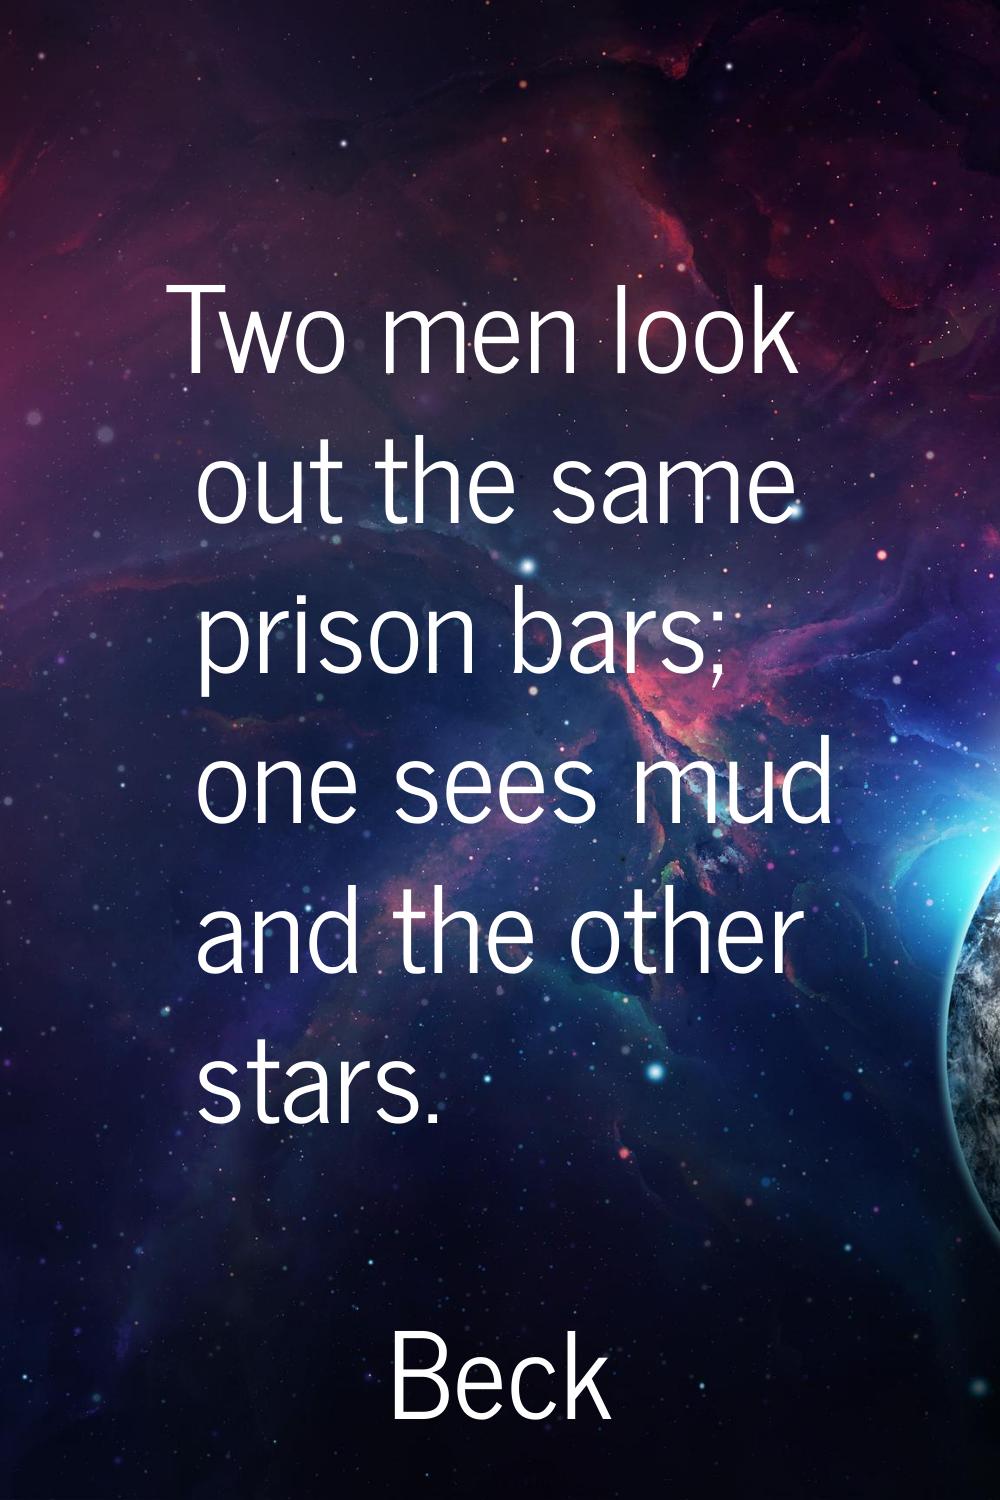 Two men look out the same prison bars; one sees mud and the other stars.